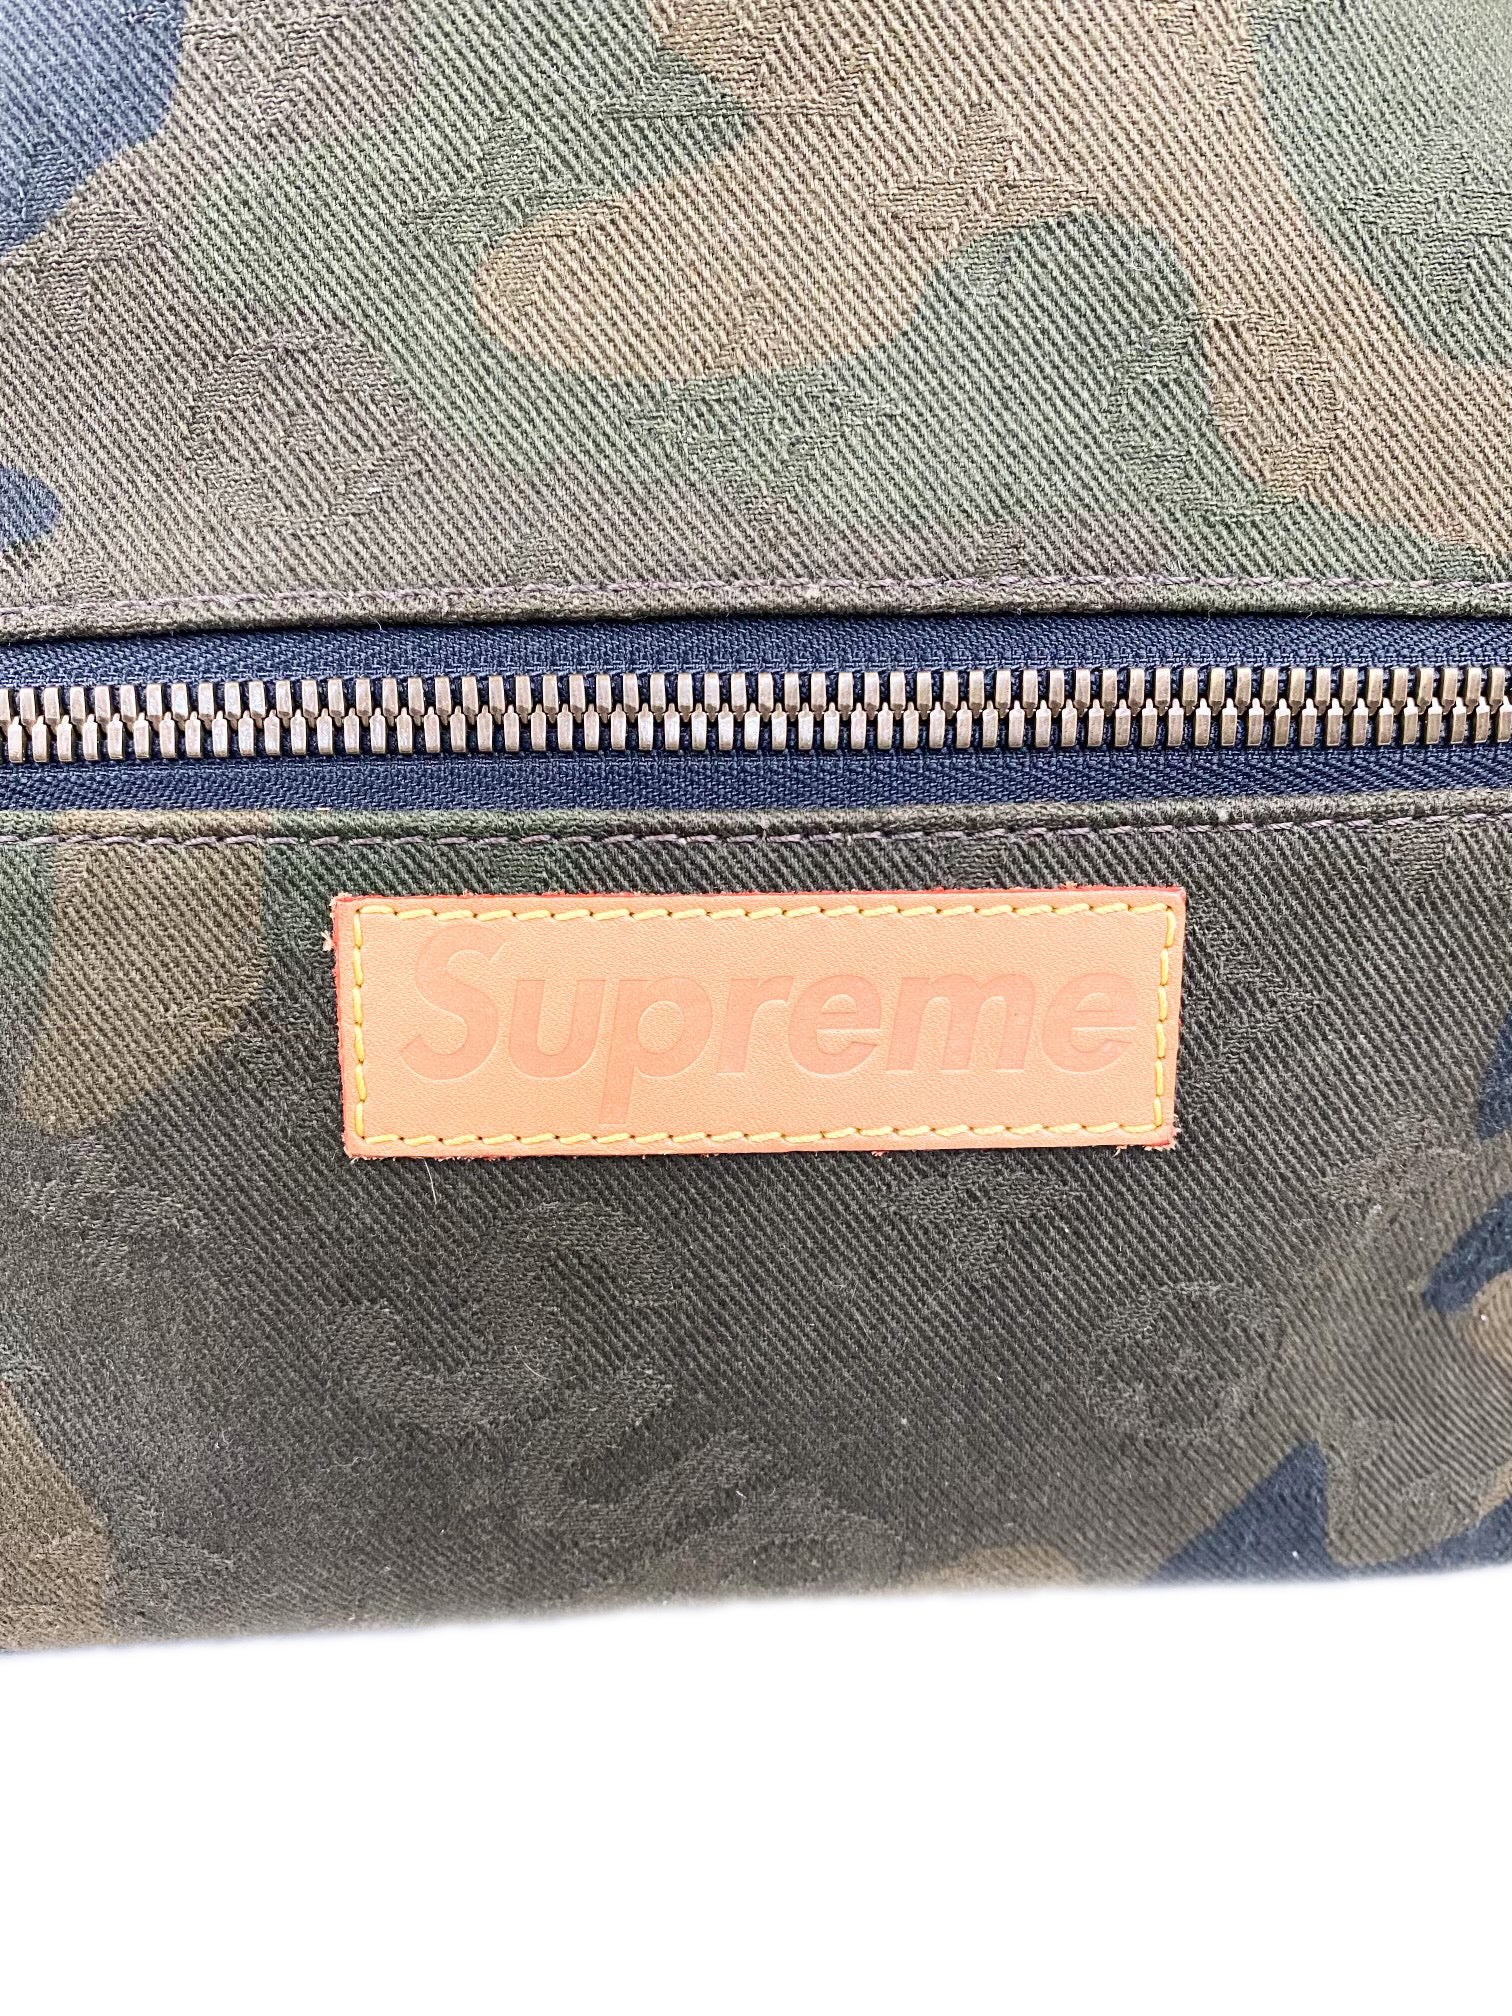 Louis Vuitton Supreme Monogram Camo Apollo Backpack, 2017 Available For  Immediate Sale At Sotheby's